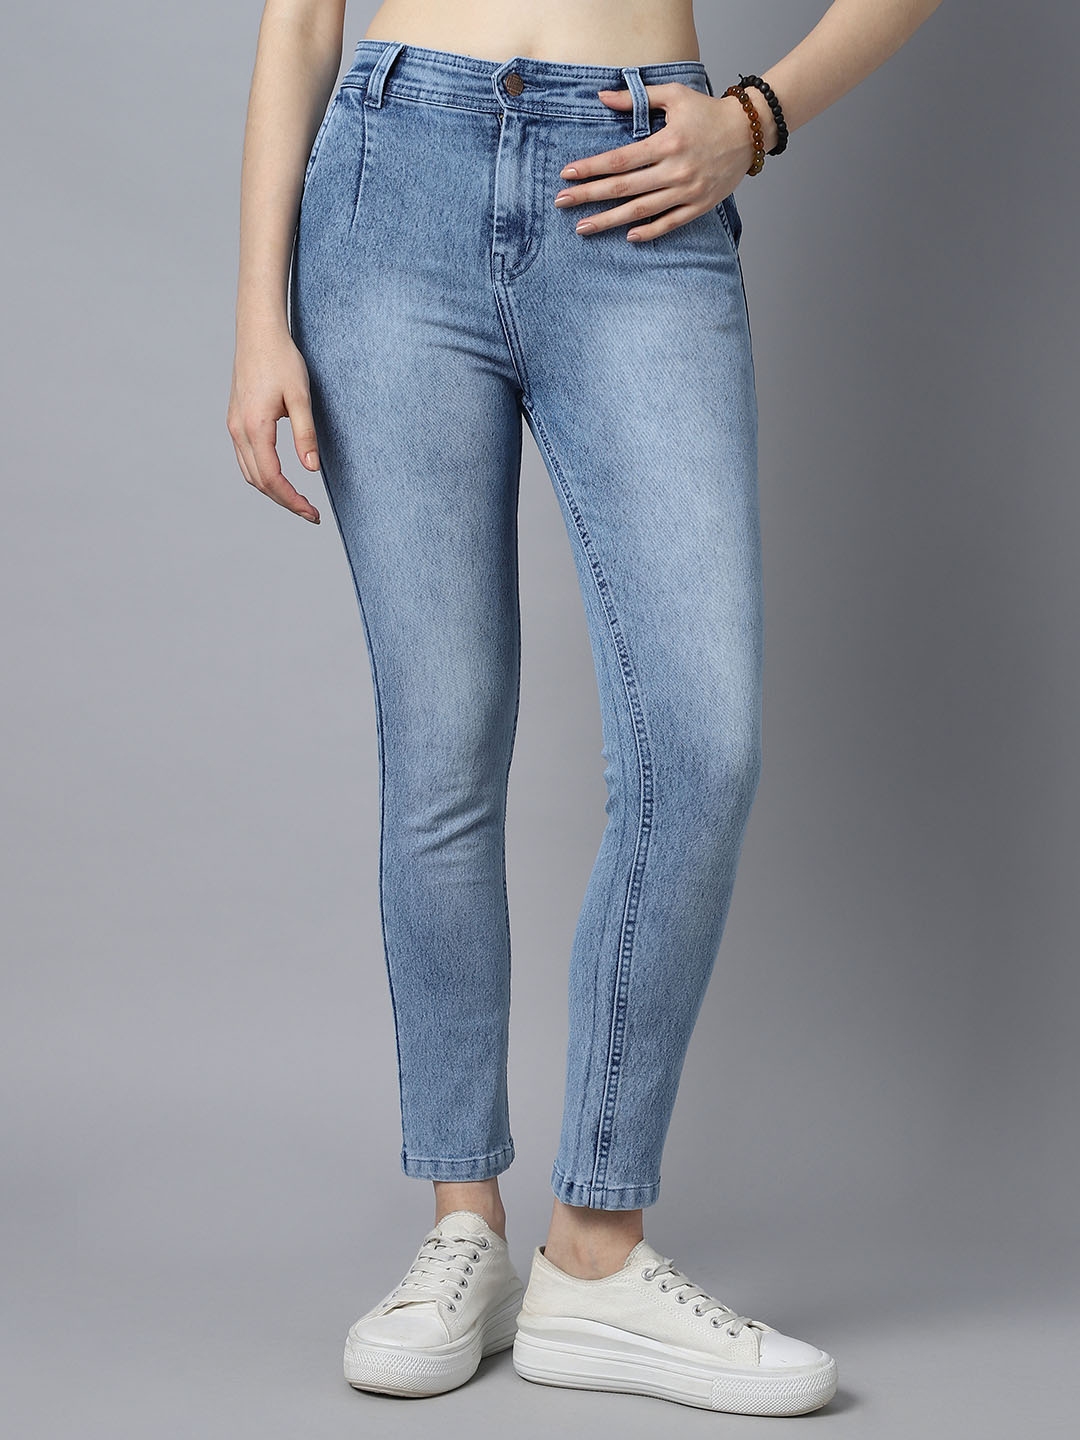 SPANX Solid Blue Jeans Size M (Tall) - 56% off